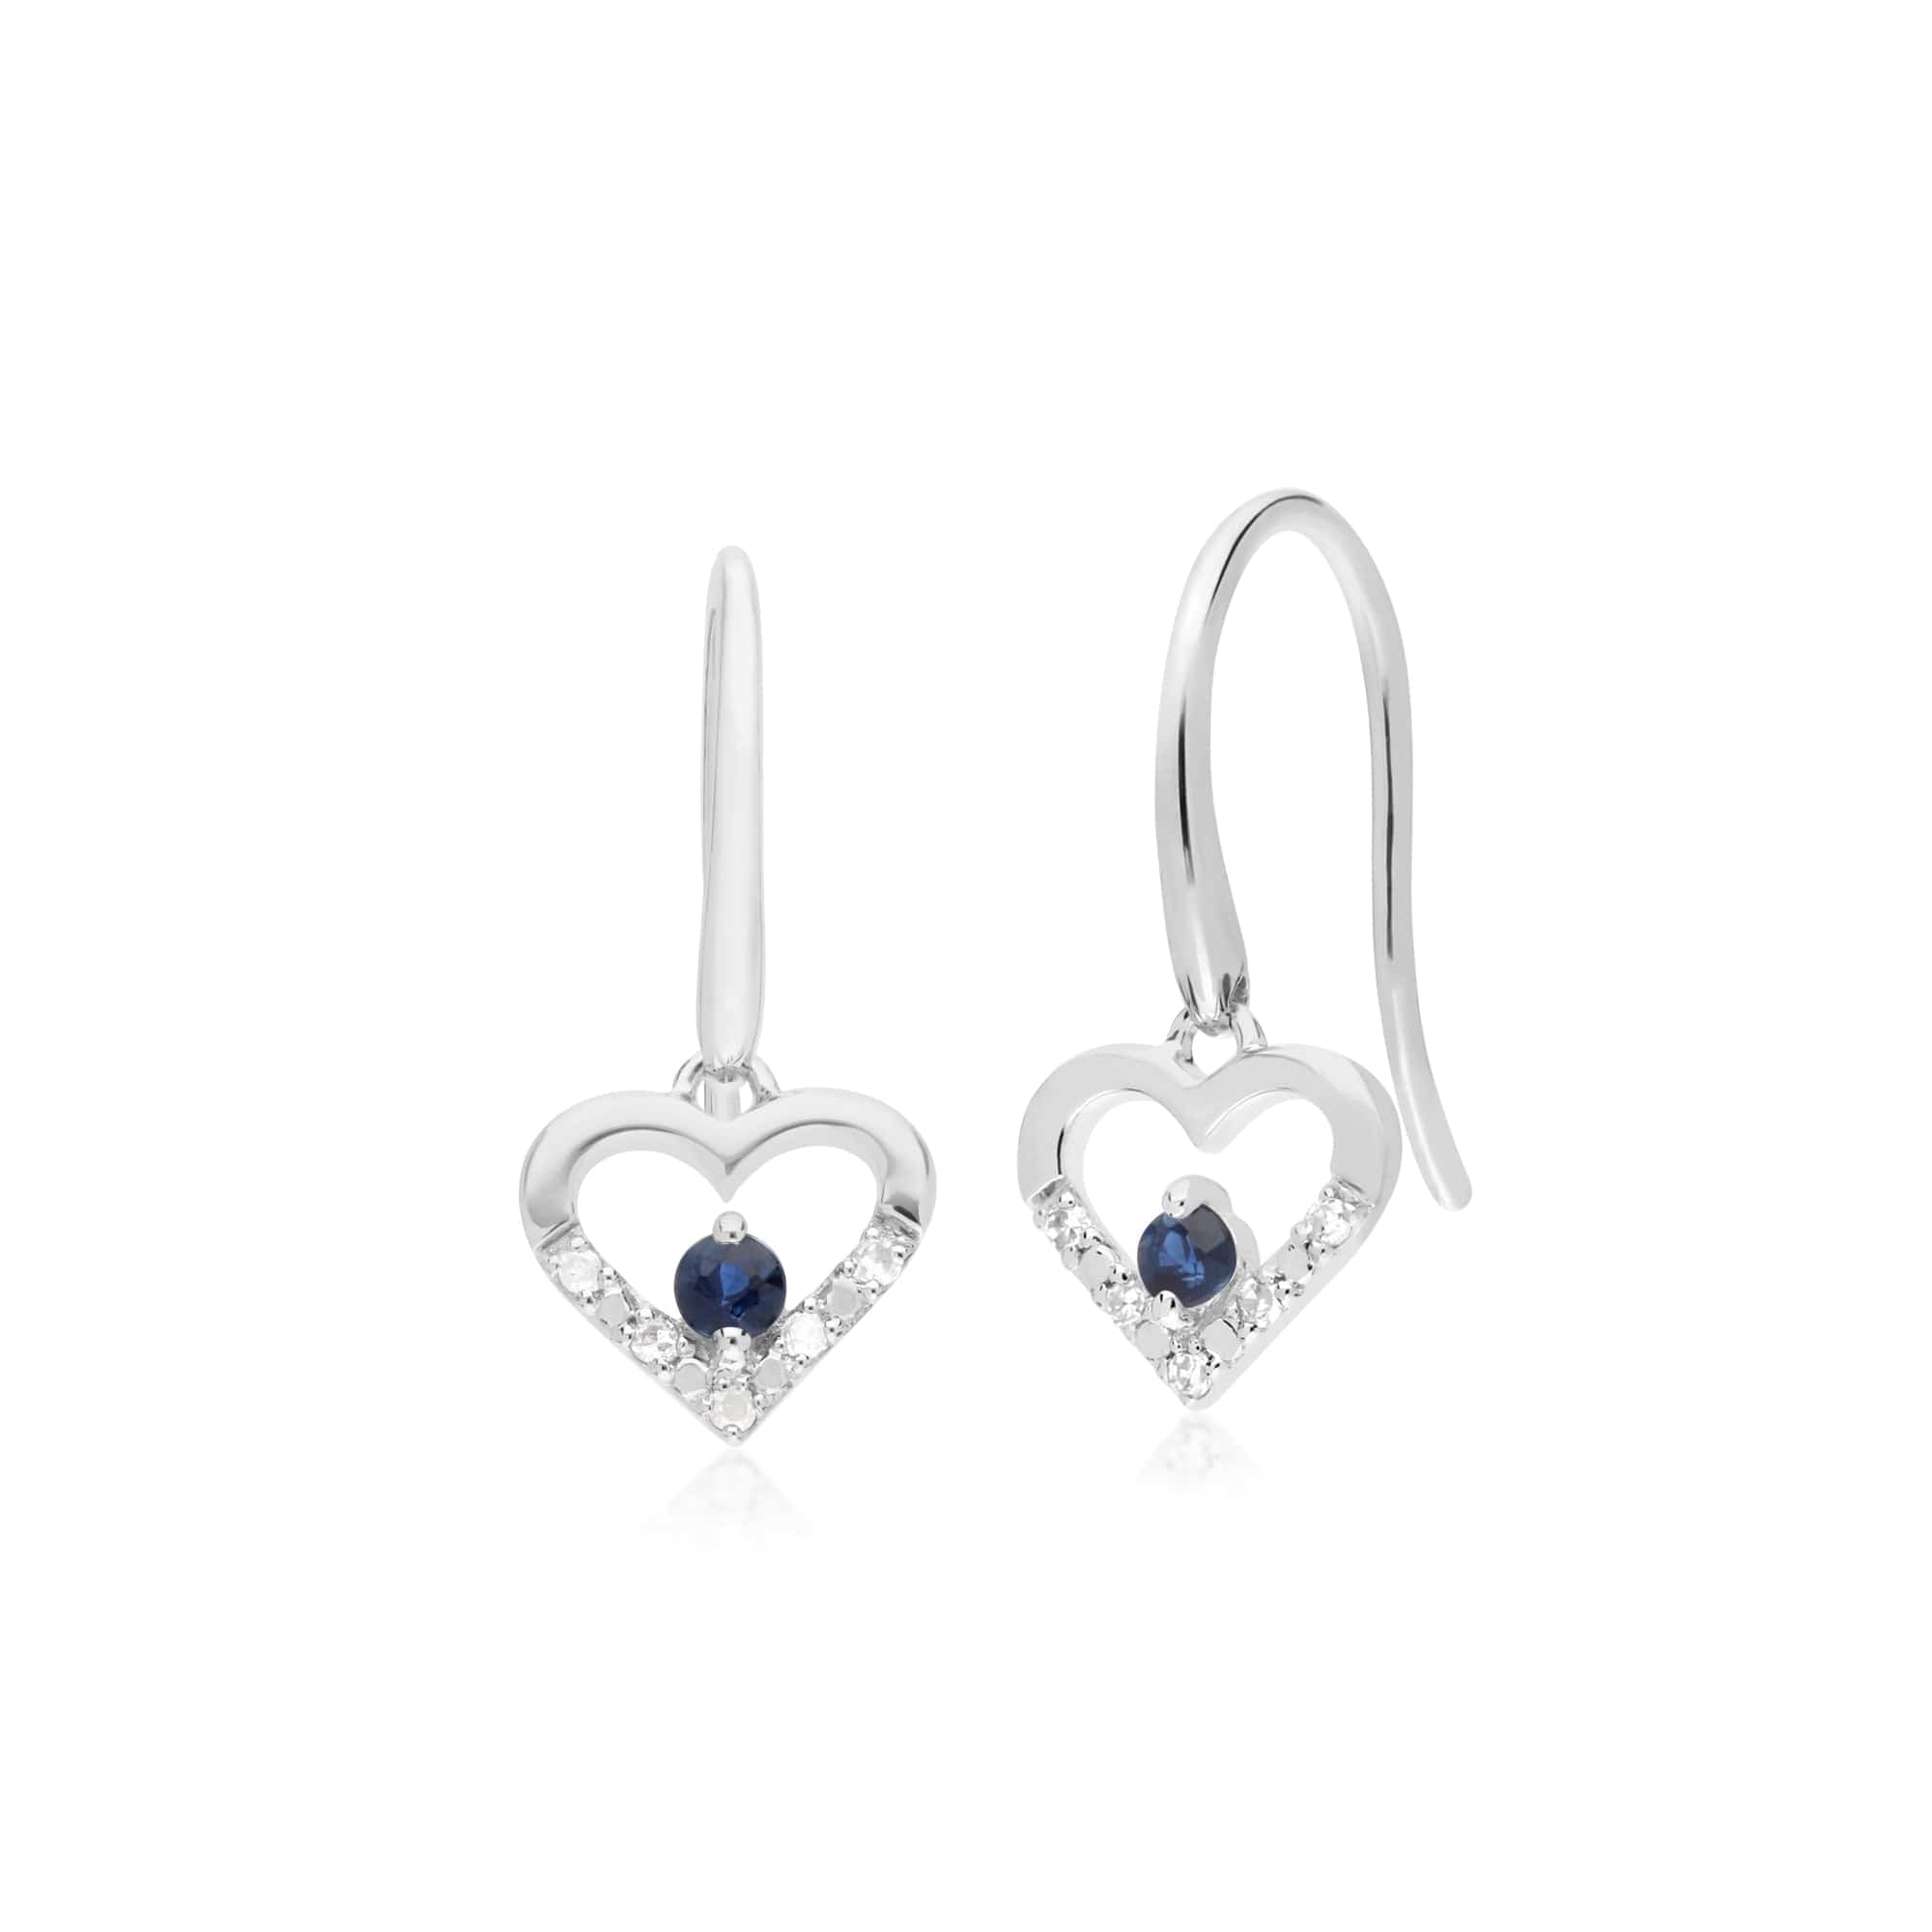 162E0258029 Classic Round Sapphire & Diamond Love Heart Shaped Drop Earrings in 9ct White Gold 1